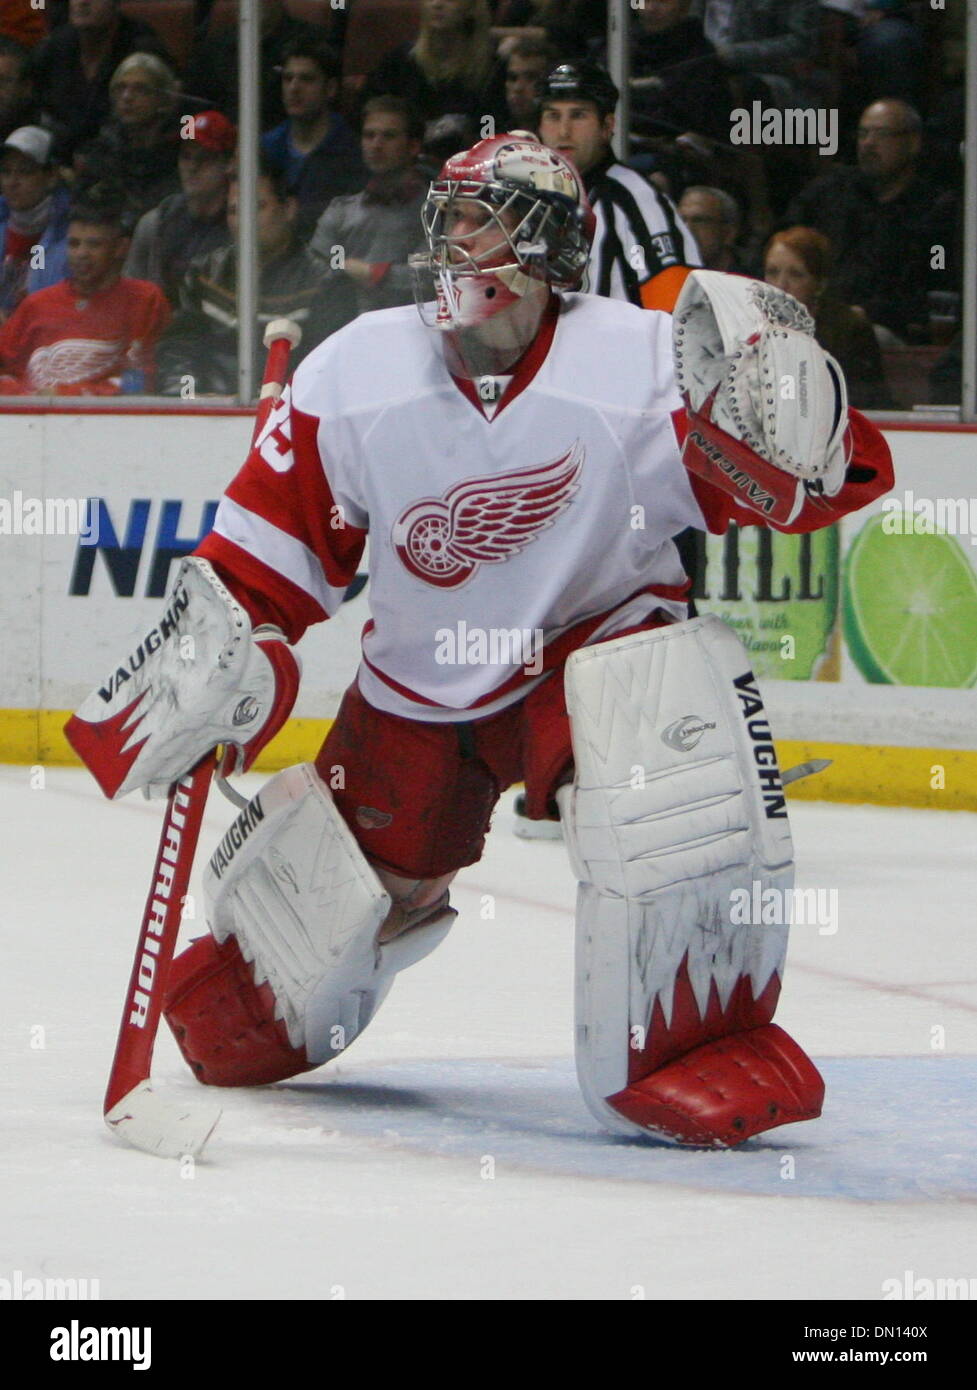 Jan 05, 2010 - Anaheim, California, USA - Detroit Red Wings goalie JIMMY HOWARD is pictured during an NHL hockey game against the Anaheim Ducks at the Honda Center. (Credit Image: © Mark Samala/ZUMA Press) Stock Photo